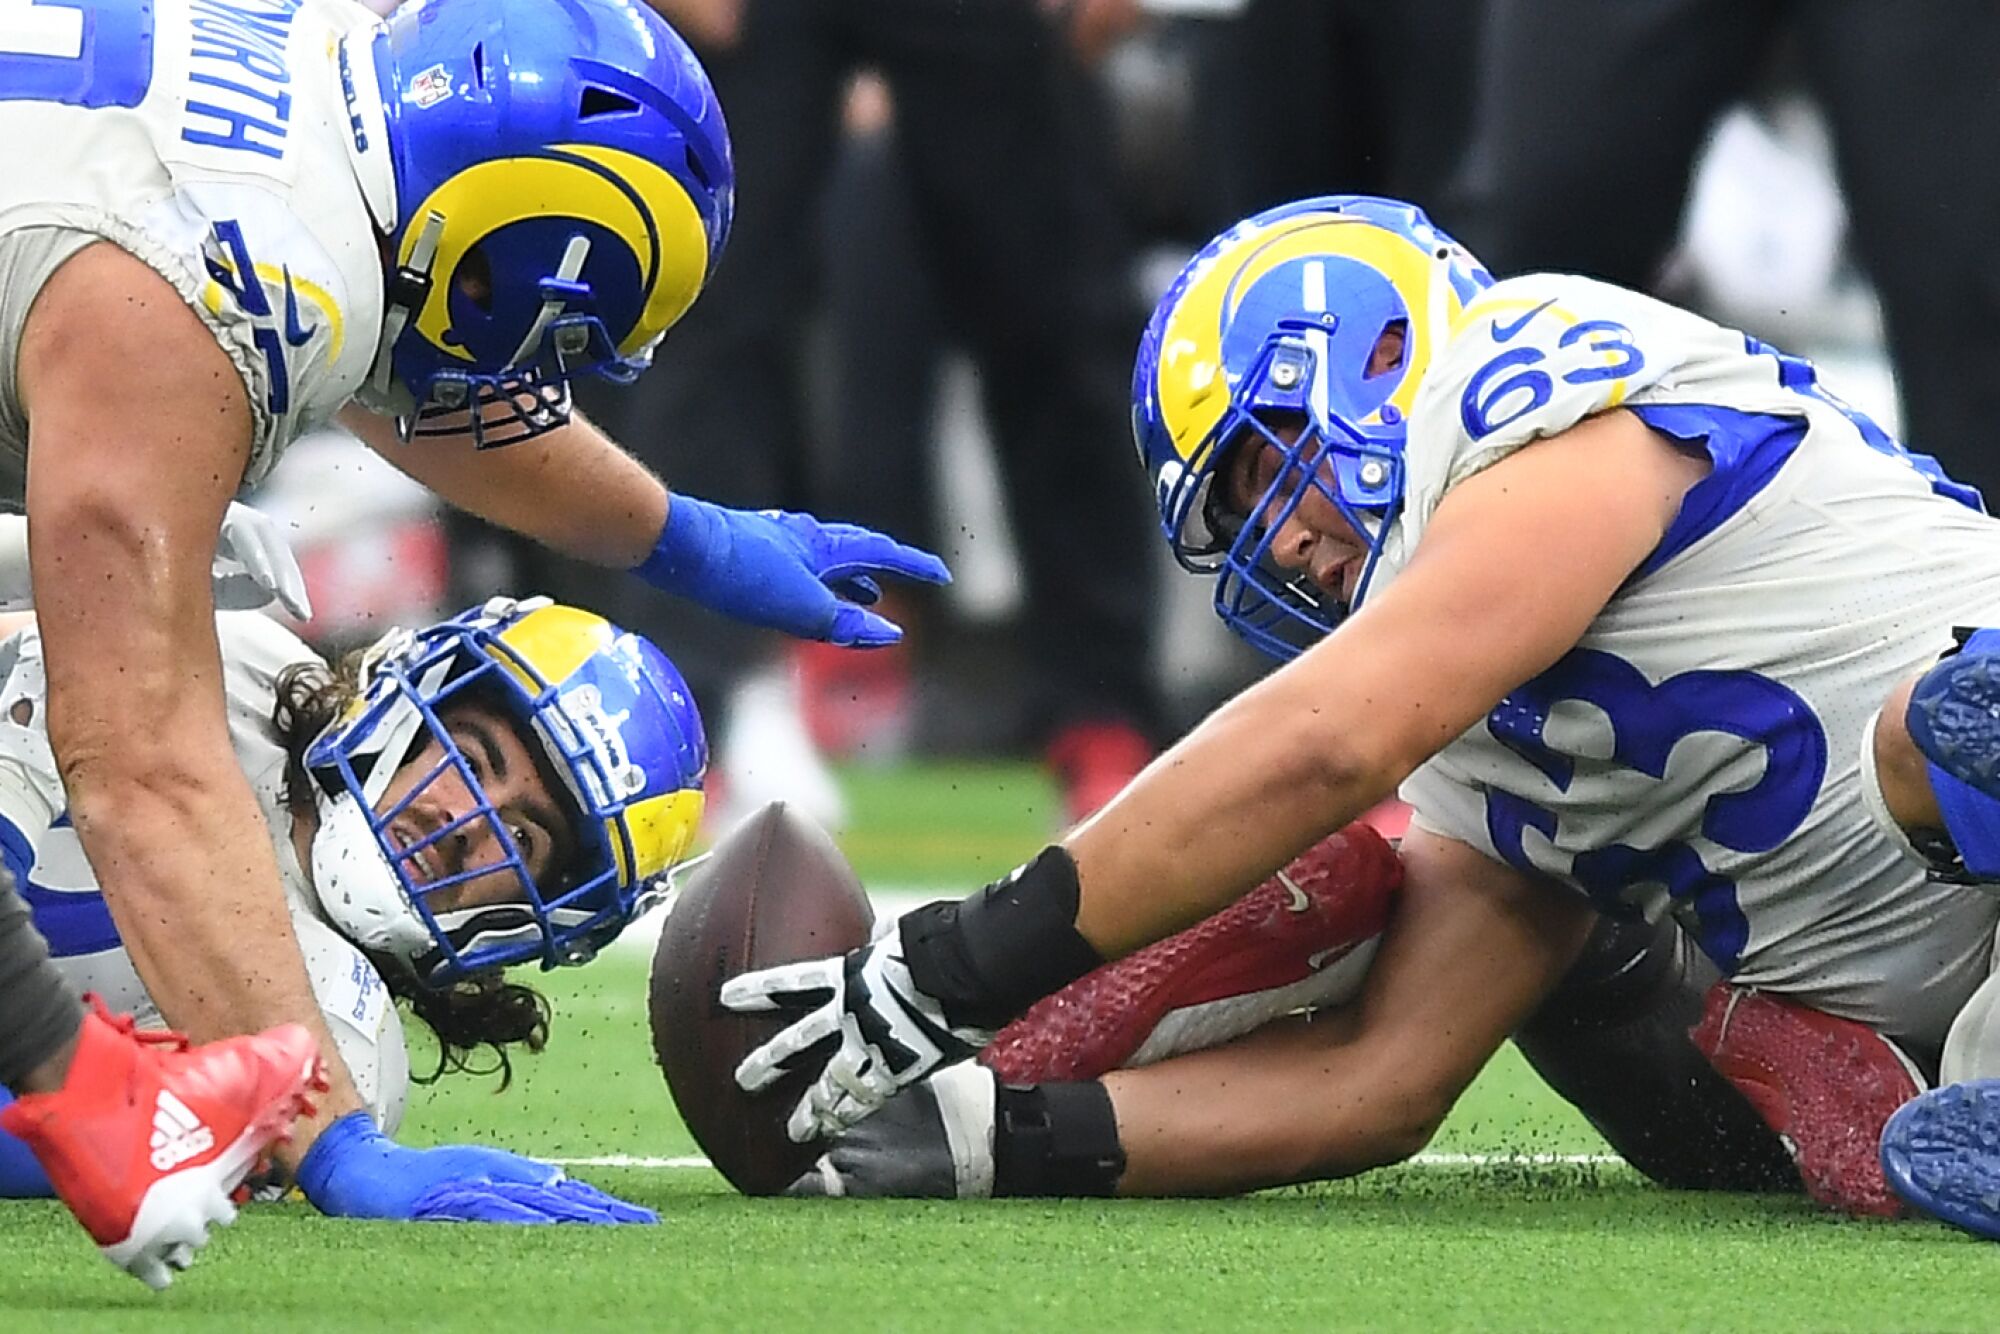 Rams tight end Tyler Higbee fumbles, but offensive linemen Rob Havenstein and Austin Corbett help recover the ball.